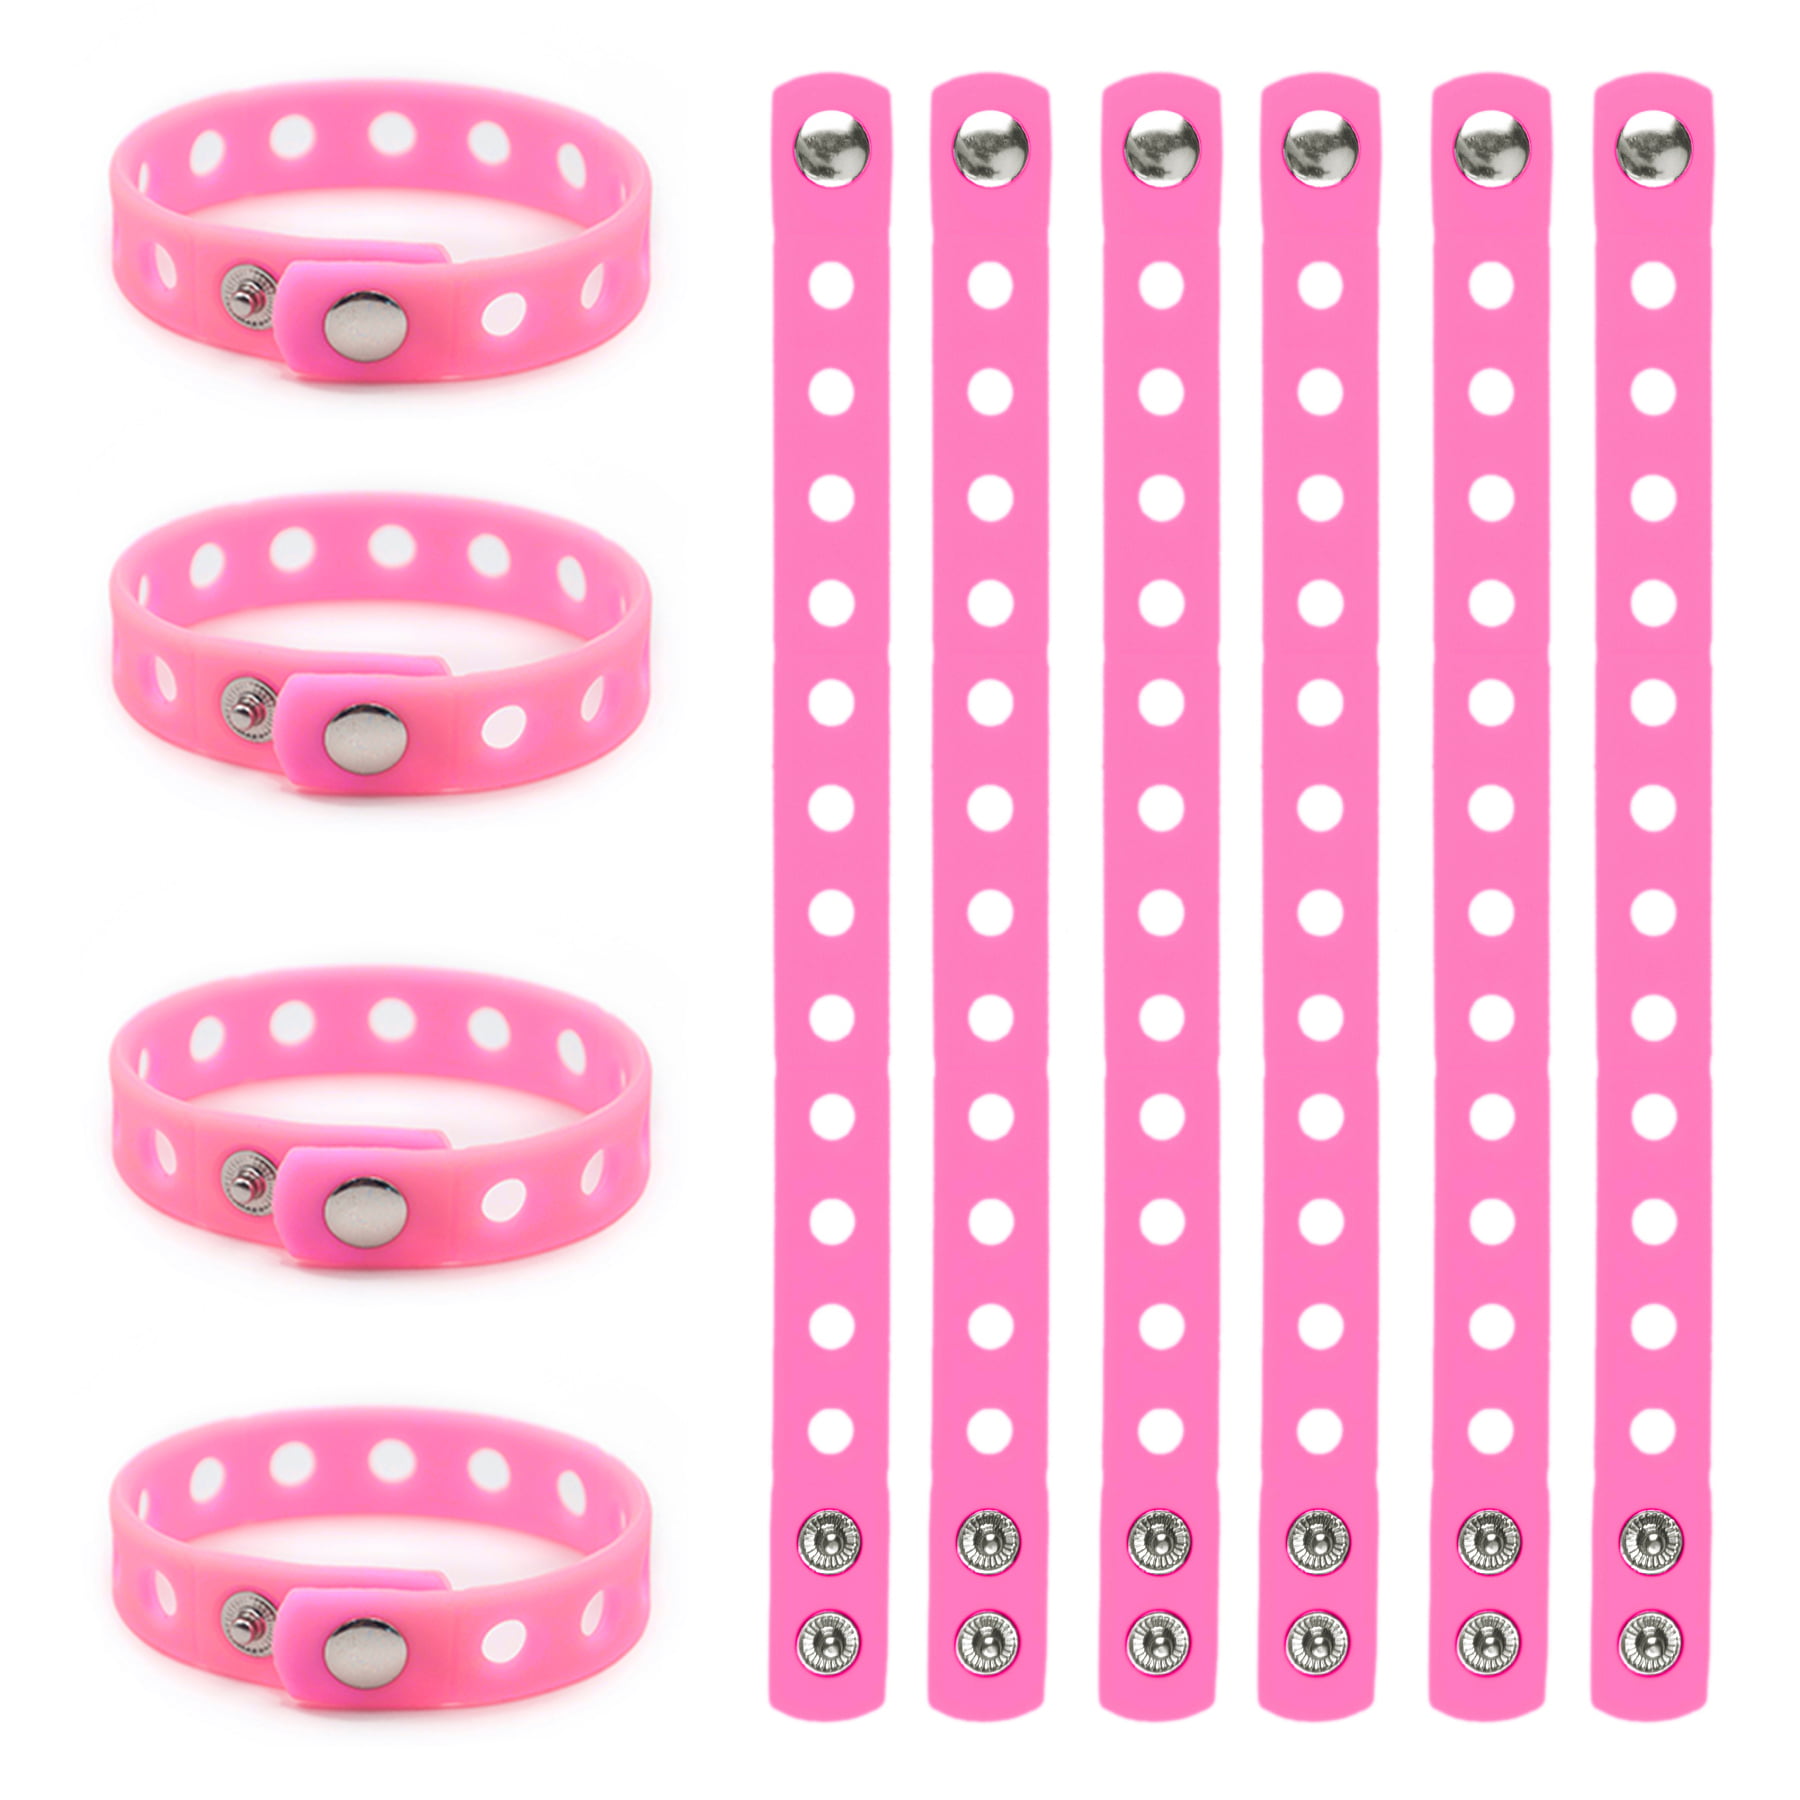 CLOG SHOE CHARM PLUGS 6 FLOWERS BUTTERFLY FIT WRISTBANDS FITBITS 